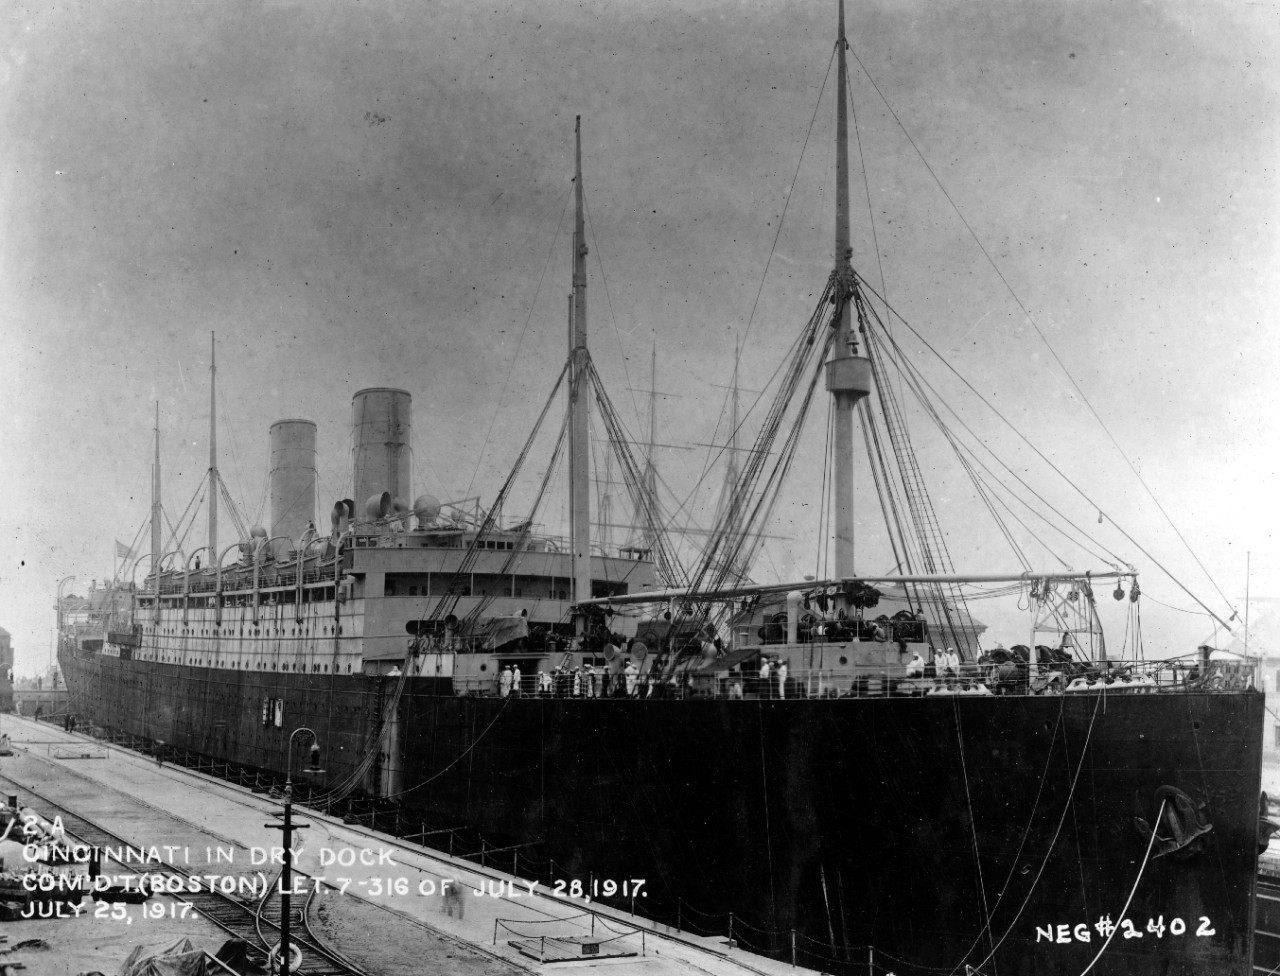 Cincinnati in dry dock, Boston Navy Yard, 25 July 1917. Note masts of the frigate Constitution in the background. (U.S. Navy Bureau of Ships Photograph 19-N-2402, National Archives and Records Administration, Still Pictures Division, College Park, Md.)